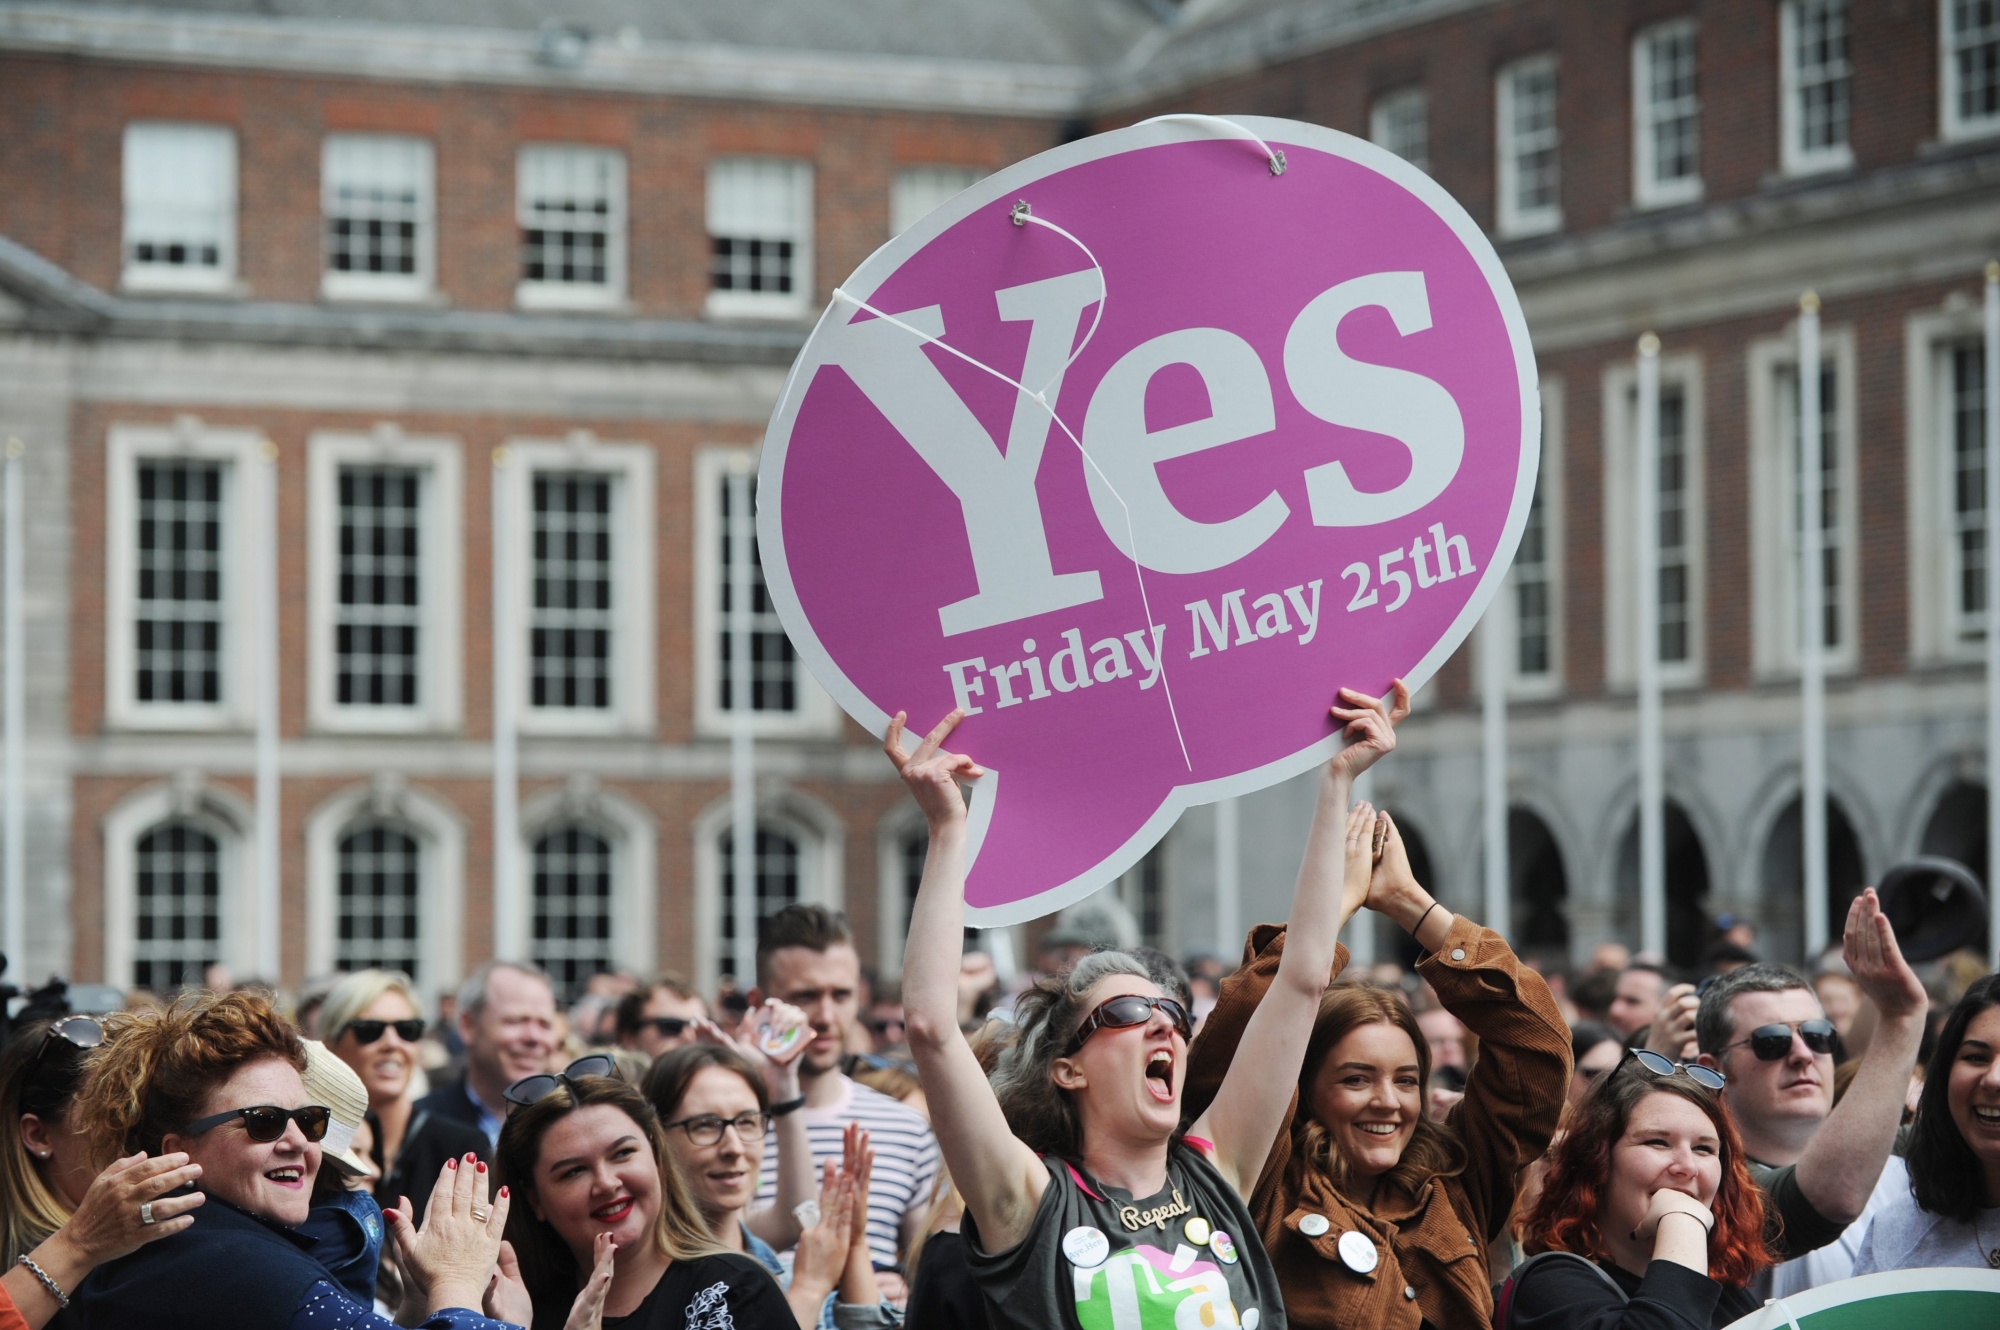 epaselect epa06764757 Supporters of the Yes side celebrate after a referndum on abortion, in Dublin, Ireland, 26 May 2018. According to exit polls, Ireland has voted overwhelmingly to legalize abortion in a historic referendum on 25 May 2018.  EPA/AIDAN CRAWLEY epaselect IRELAND REFERENDA ABORTION